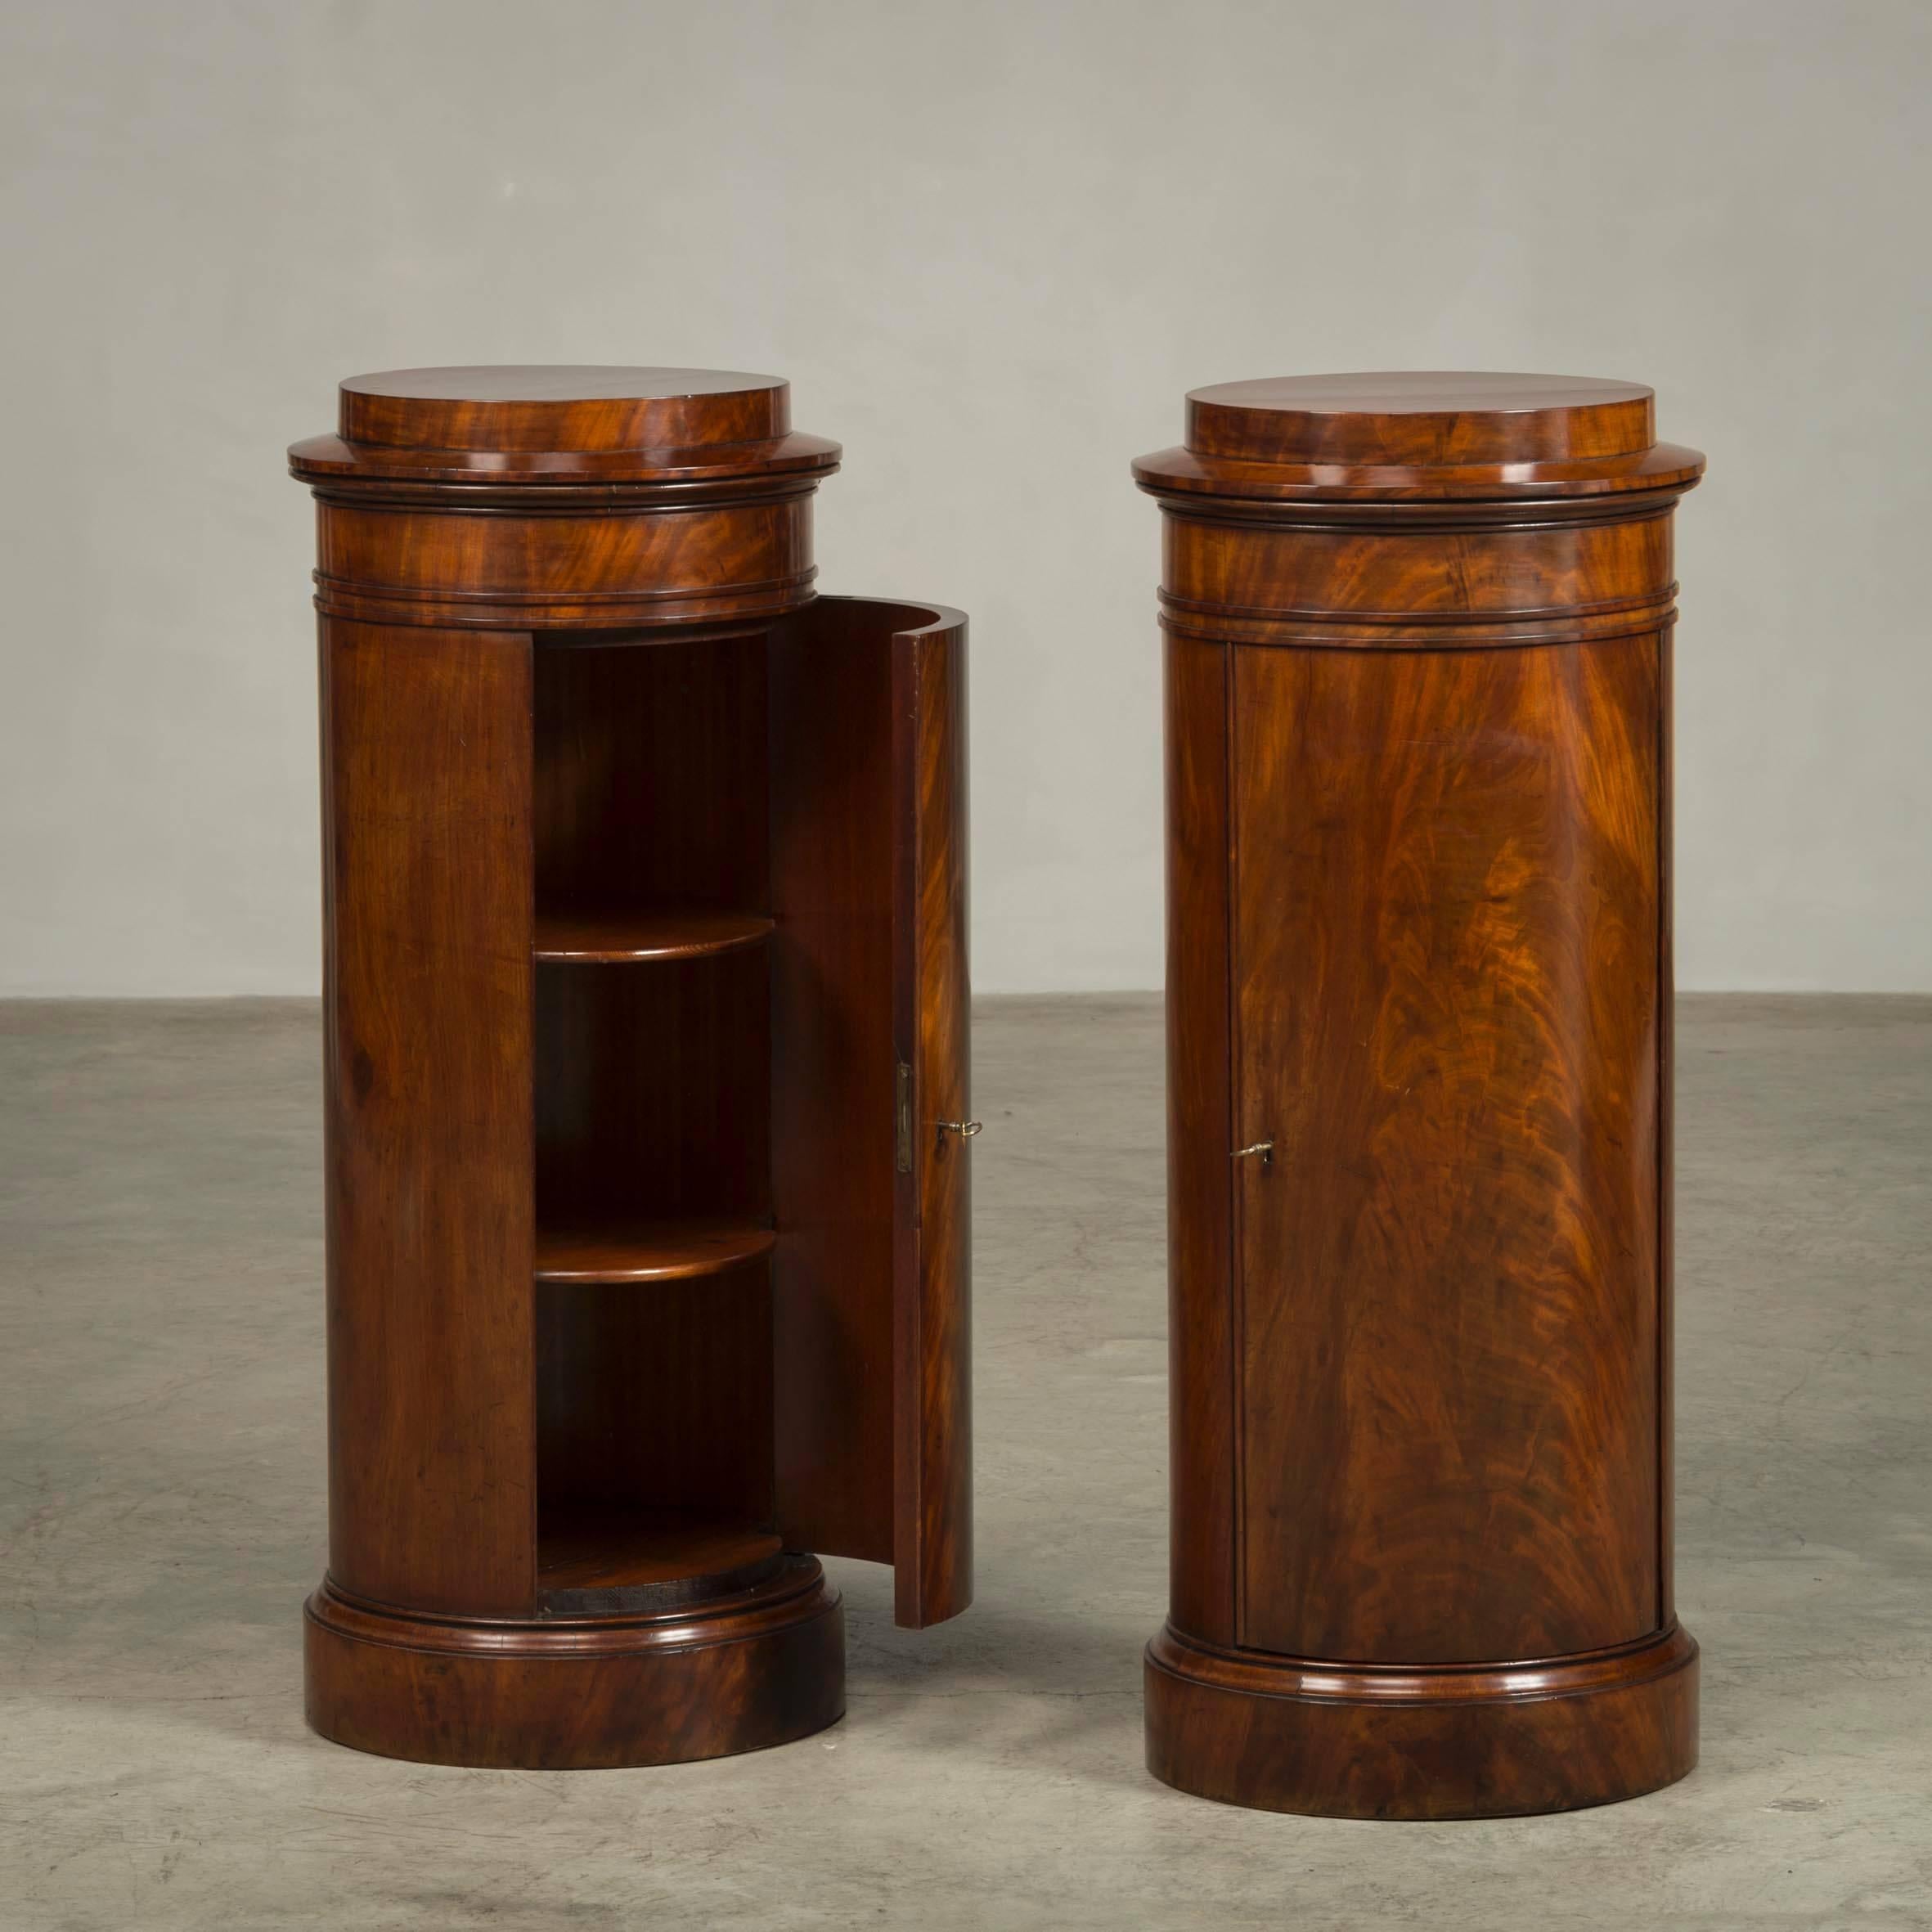 Rare pair of round late Empire pedestal cabinets veneered with flamed Cuban mahogany. Each with a door behind which shelves, 
Copenhagen, 1820-1830. 
Suitable for busts, vases etc.